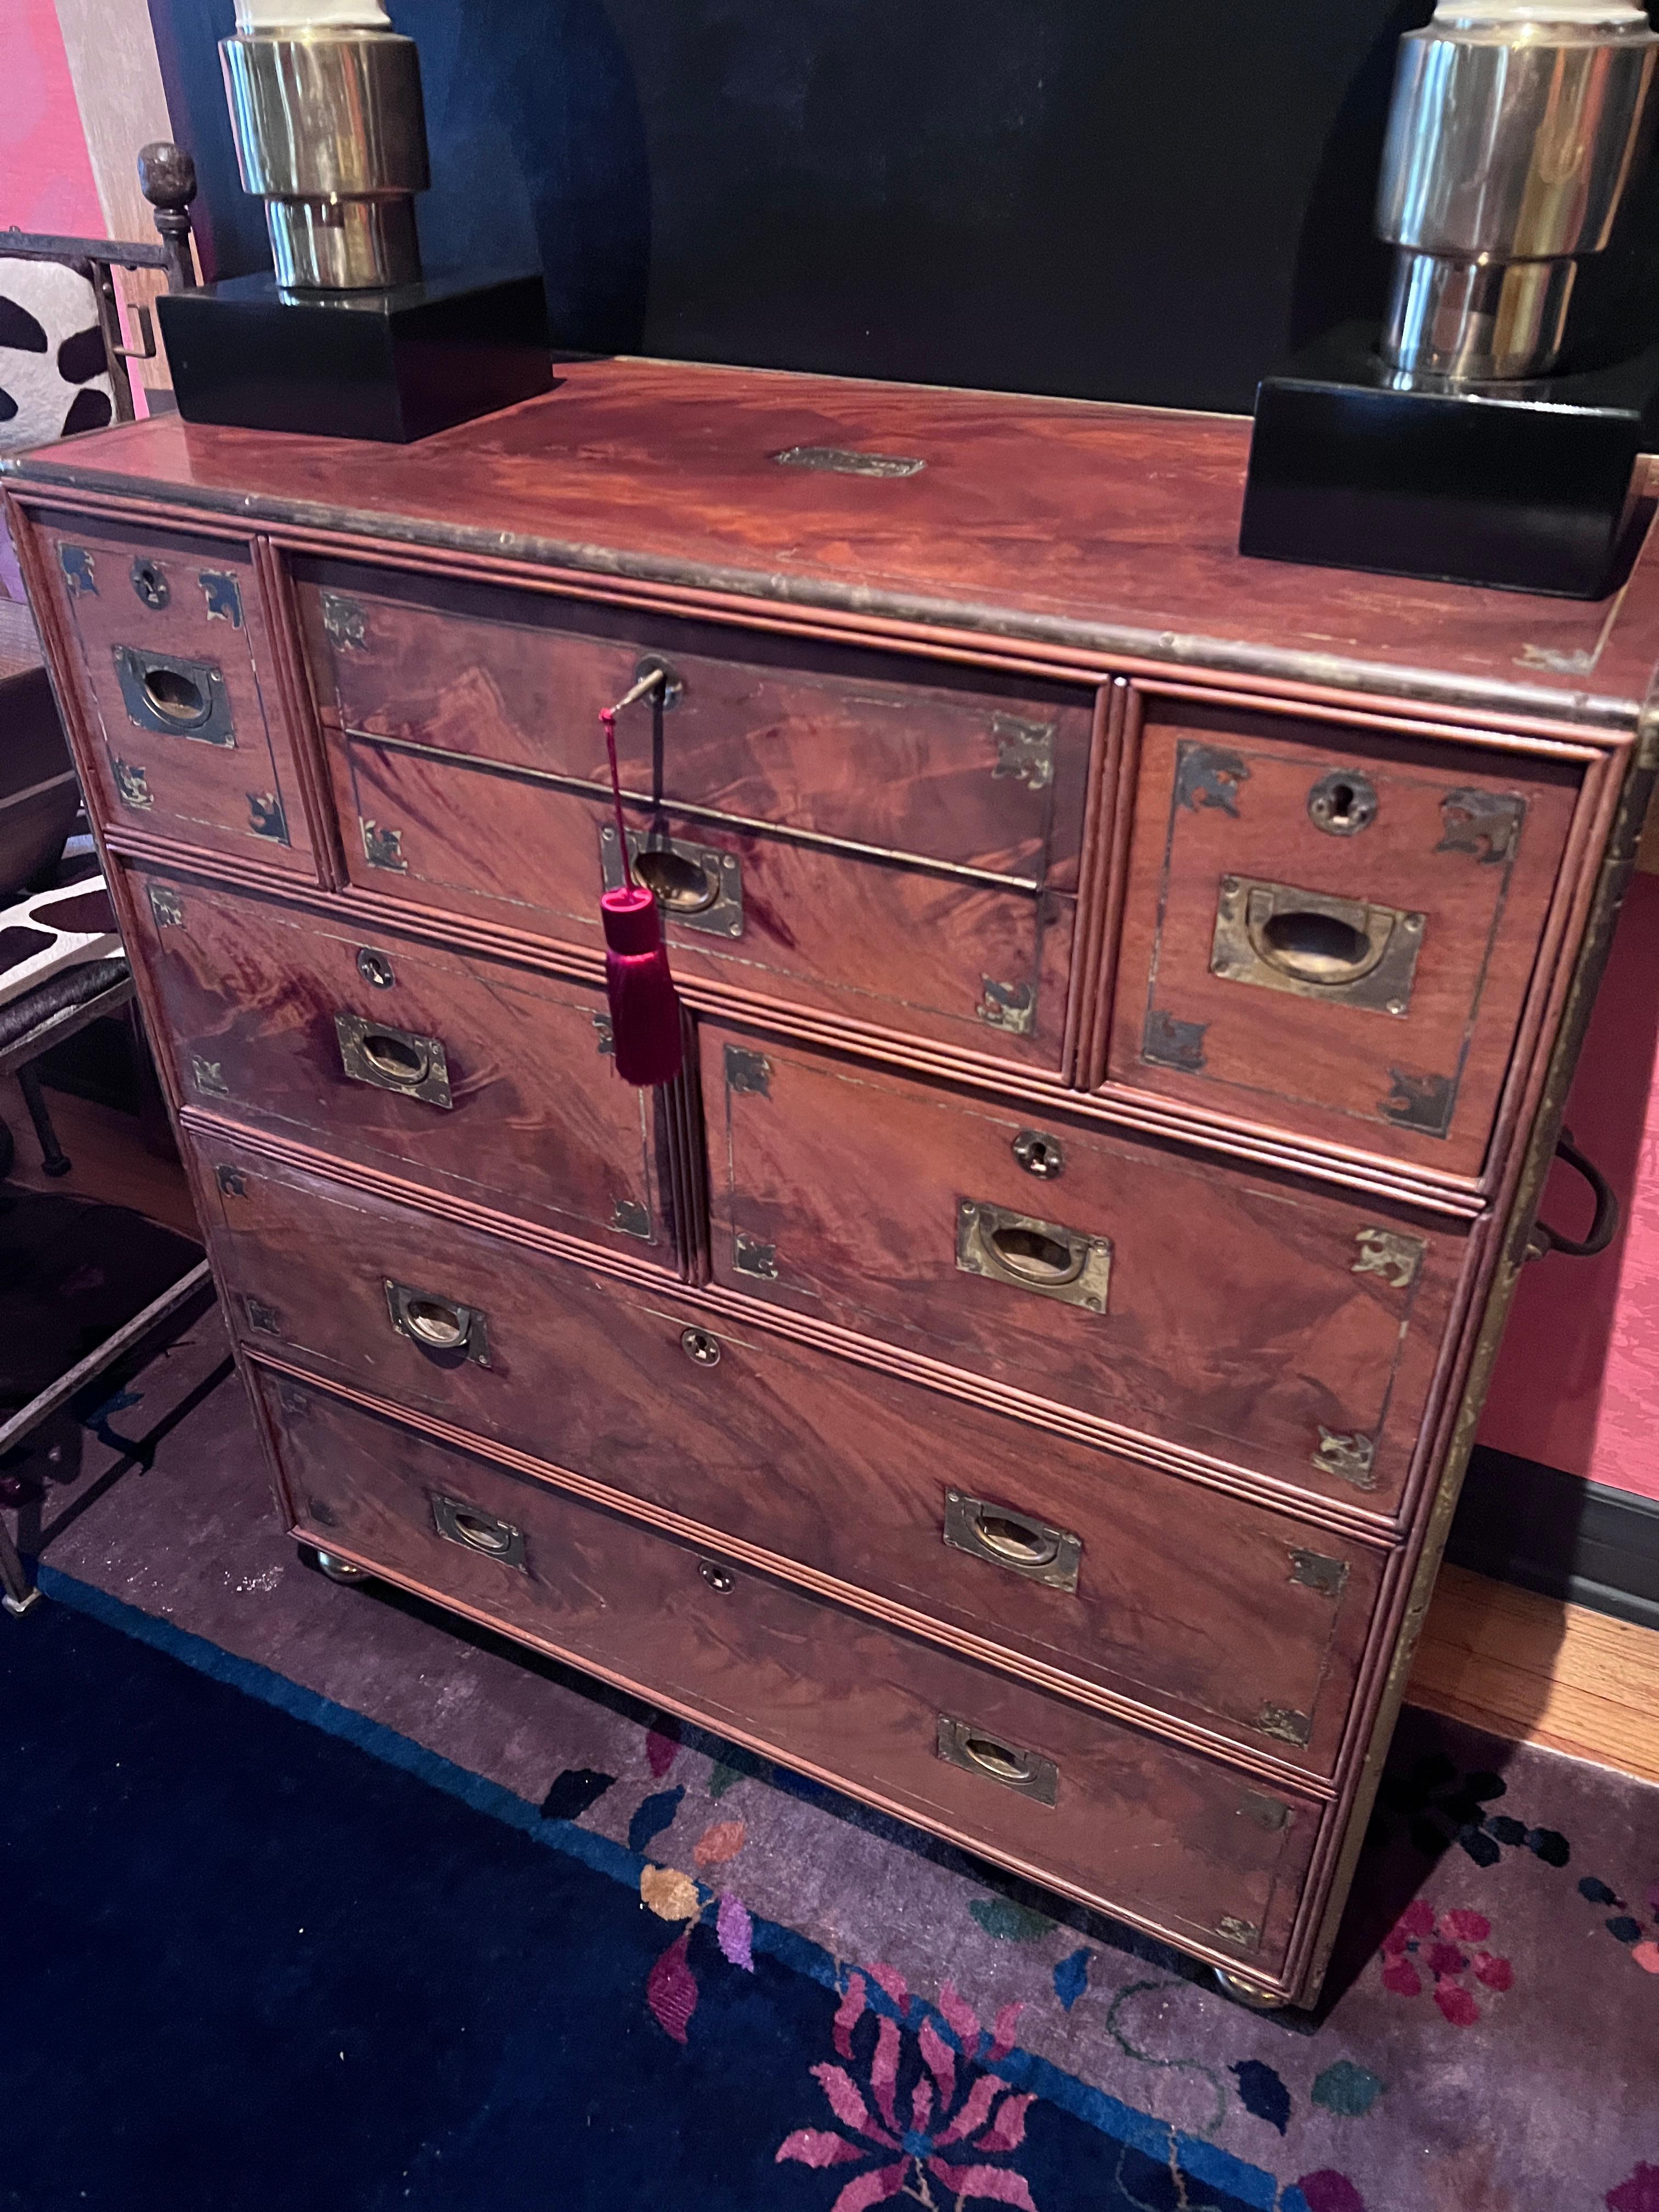 A rare Regency Campaign Chest with Desk, and six drawers for storage.  Marked, Liverpool, 1811, on Metal Label.

 The Mahogany wood is Beautifully Figured and the entire piece is banded in beautifully patinated brass.  Seven drawers are accompanied